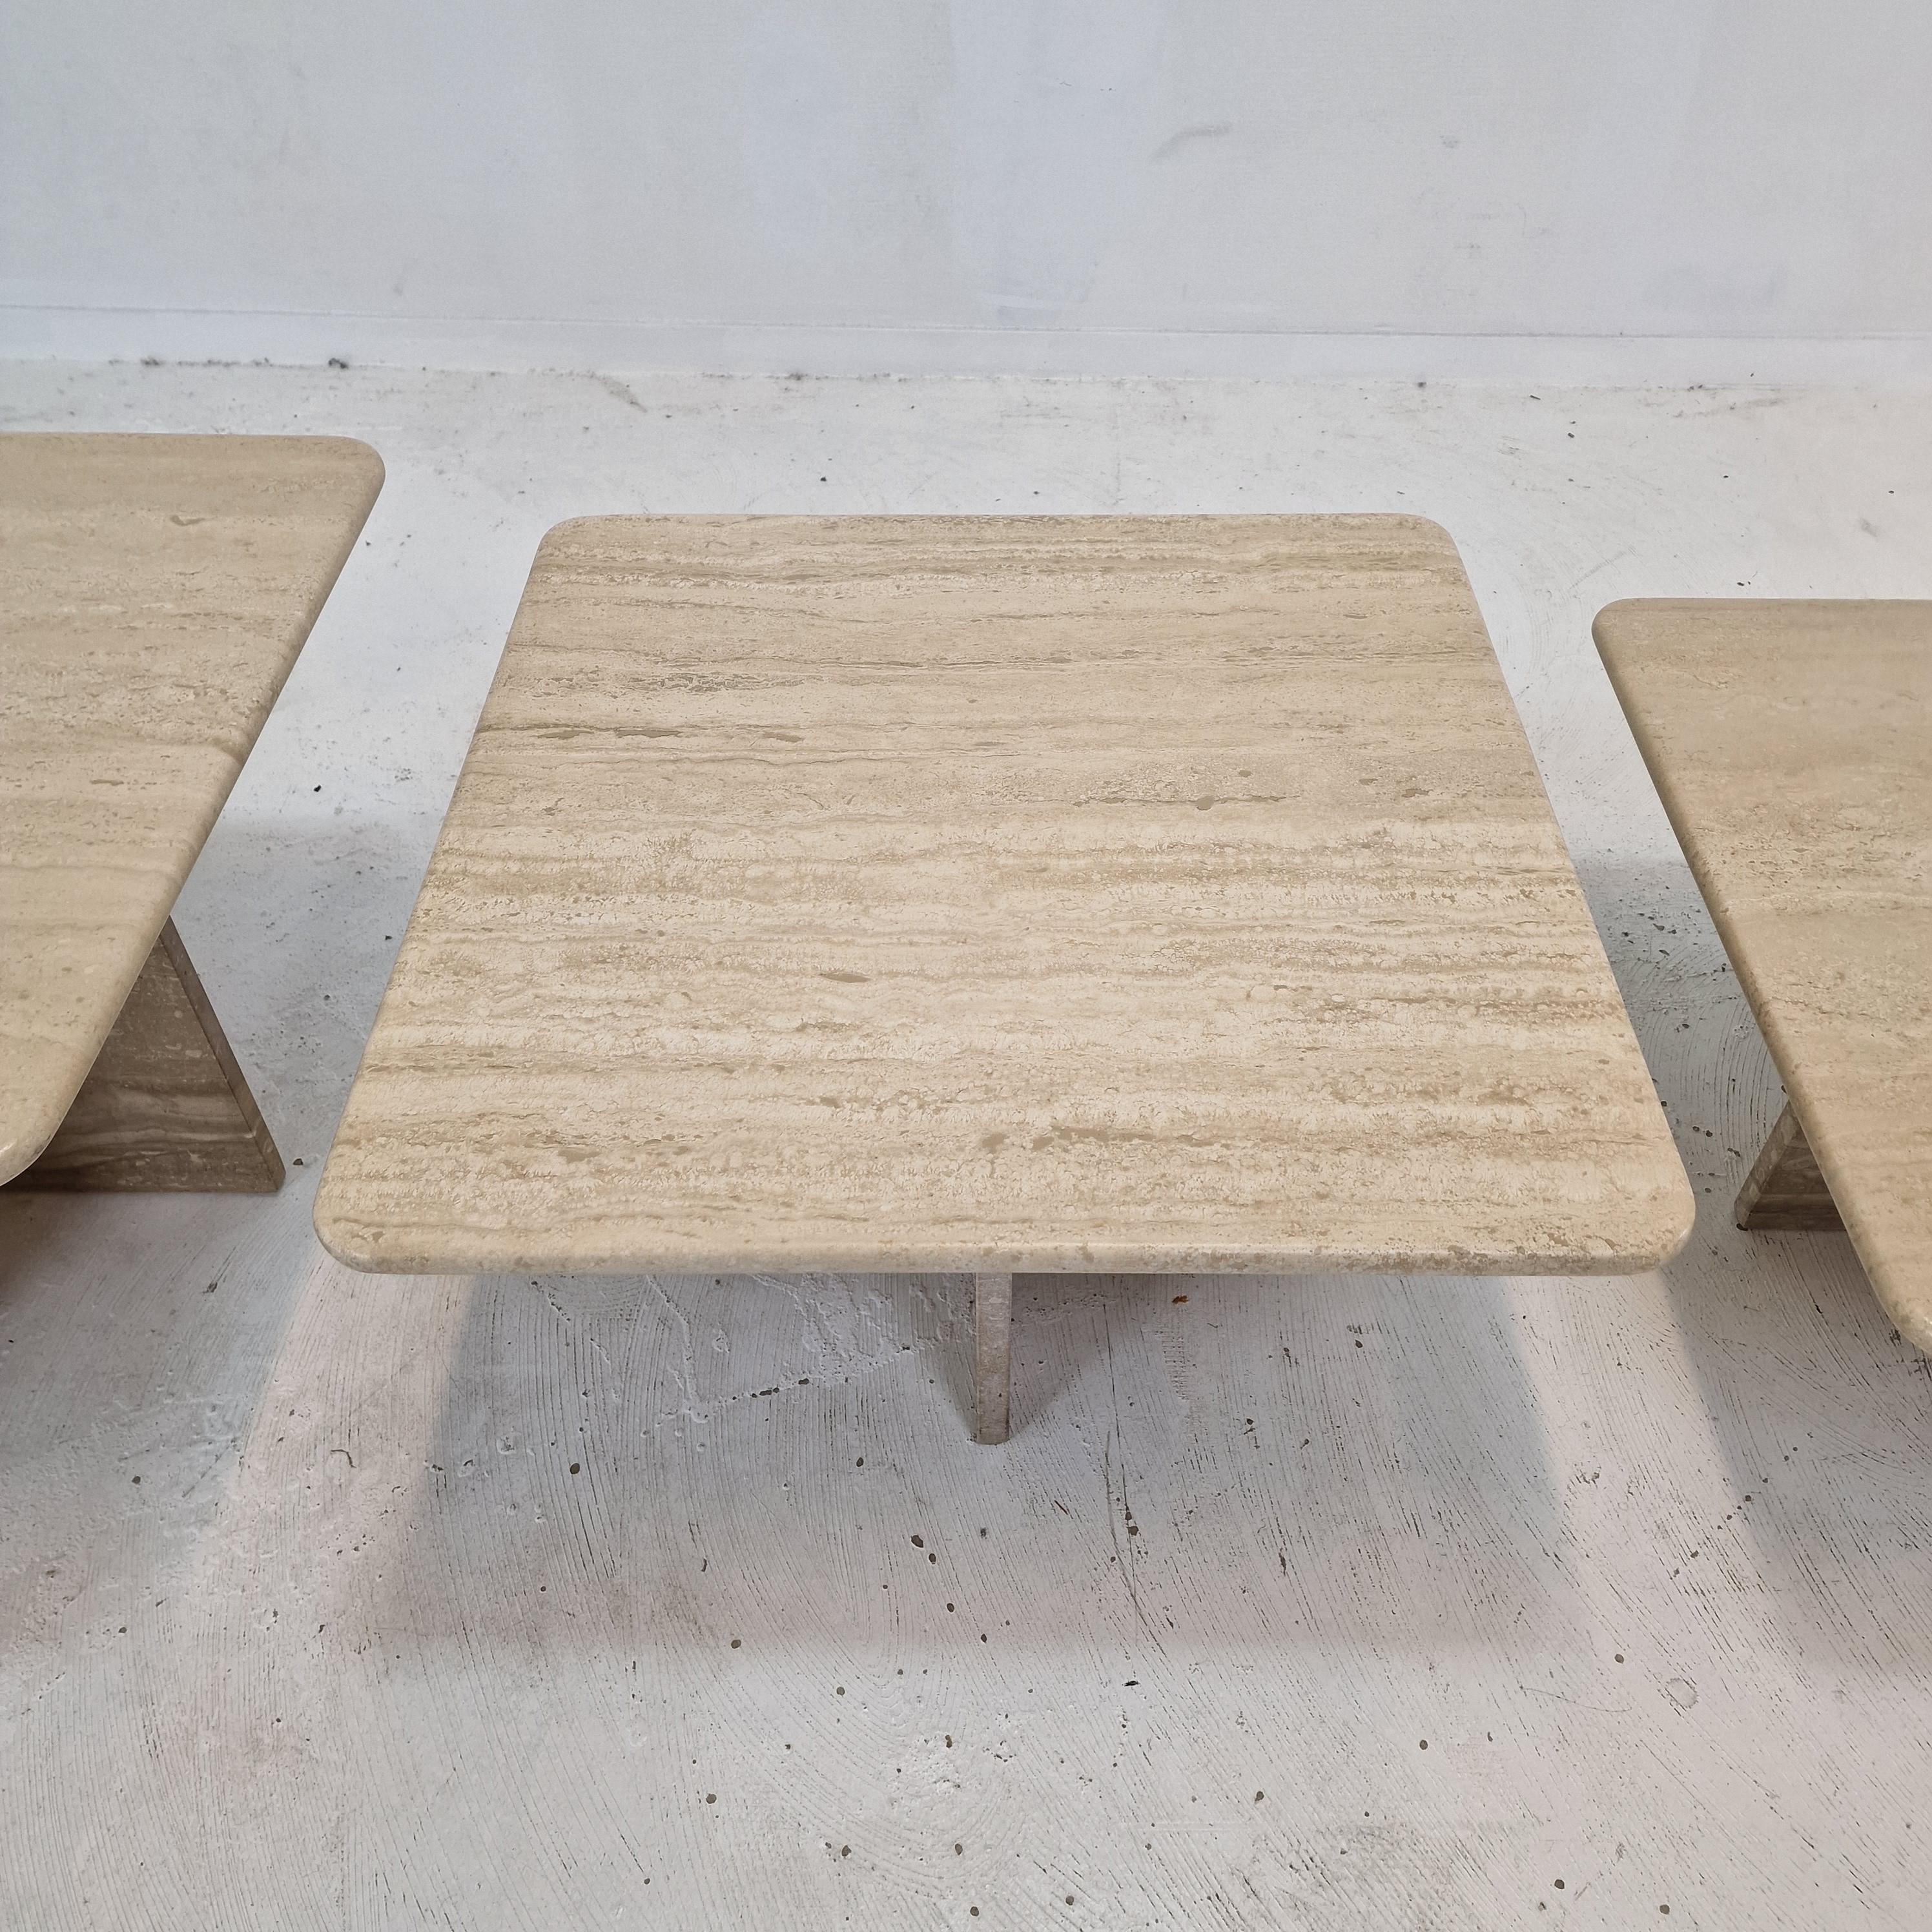 Set of 3 Italian Travertine Coffee or Side Tables, 1990s For Sale 3